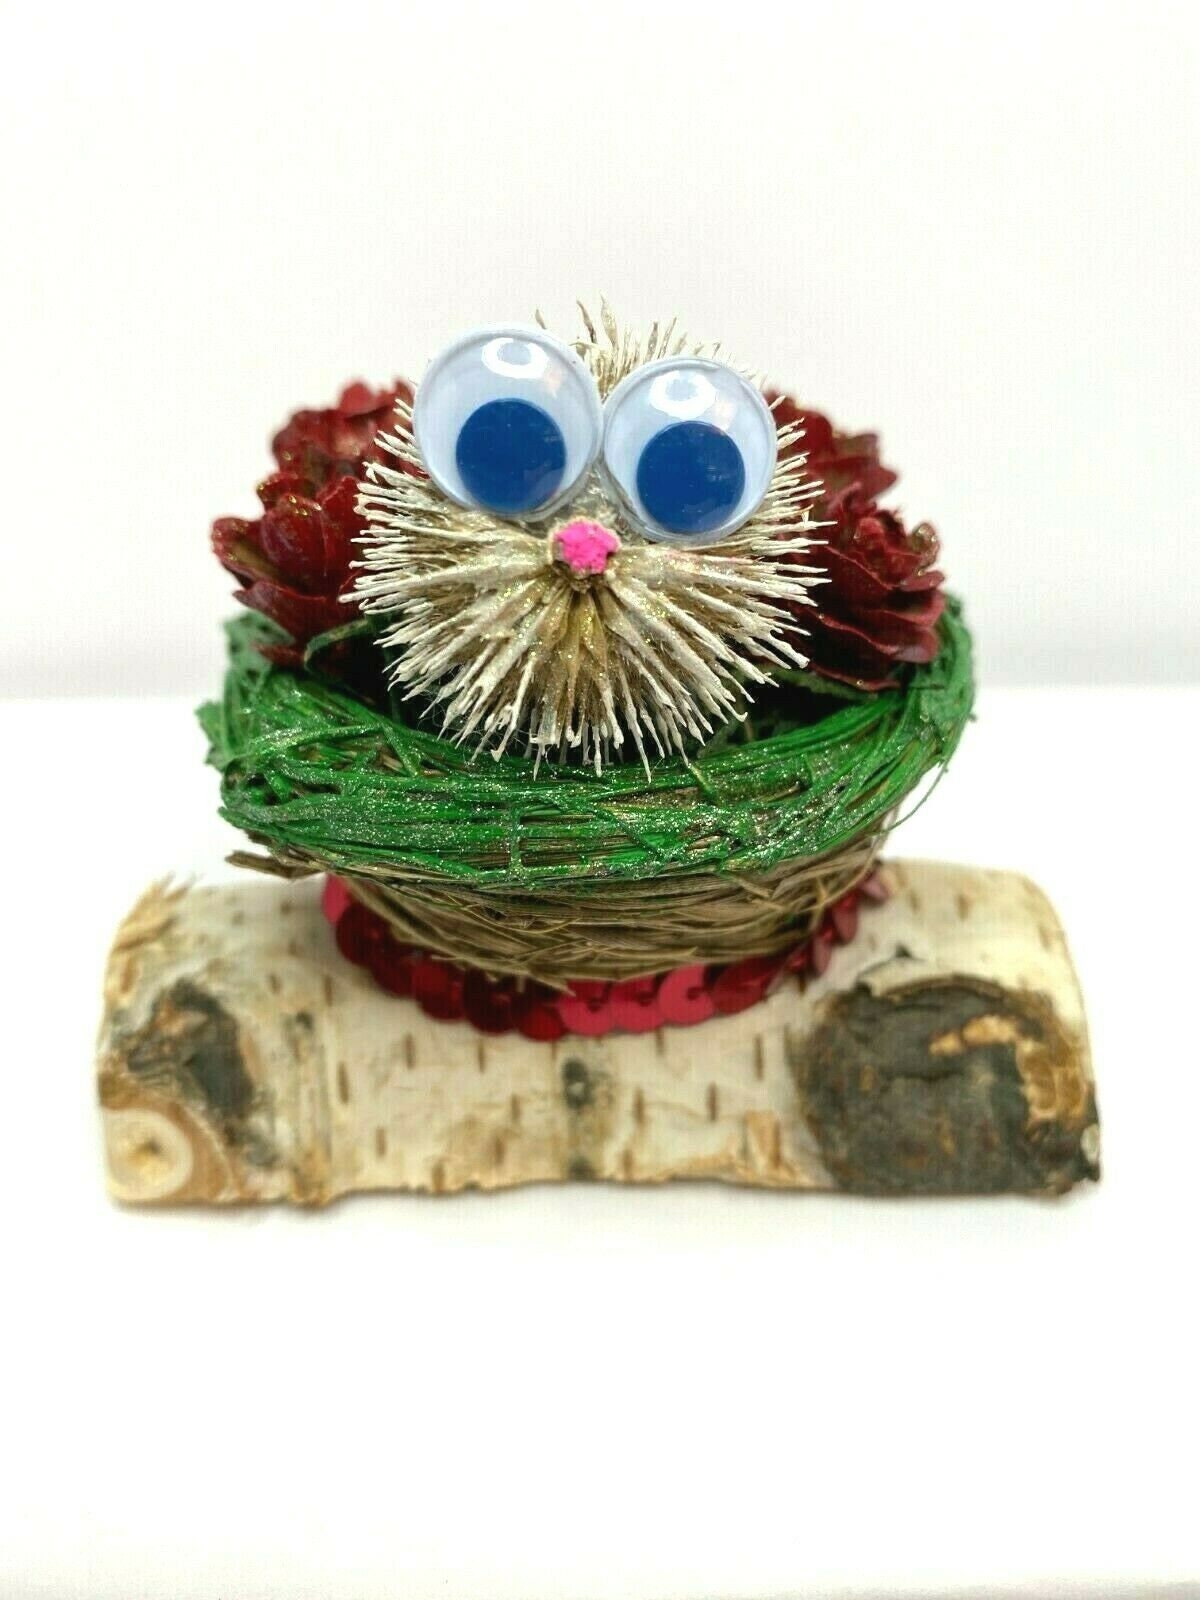 Handmade Porcupine Decoration With Blue Eyes, Natural Art Country Style Critter Animal Nest.